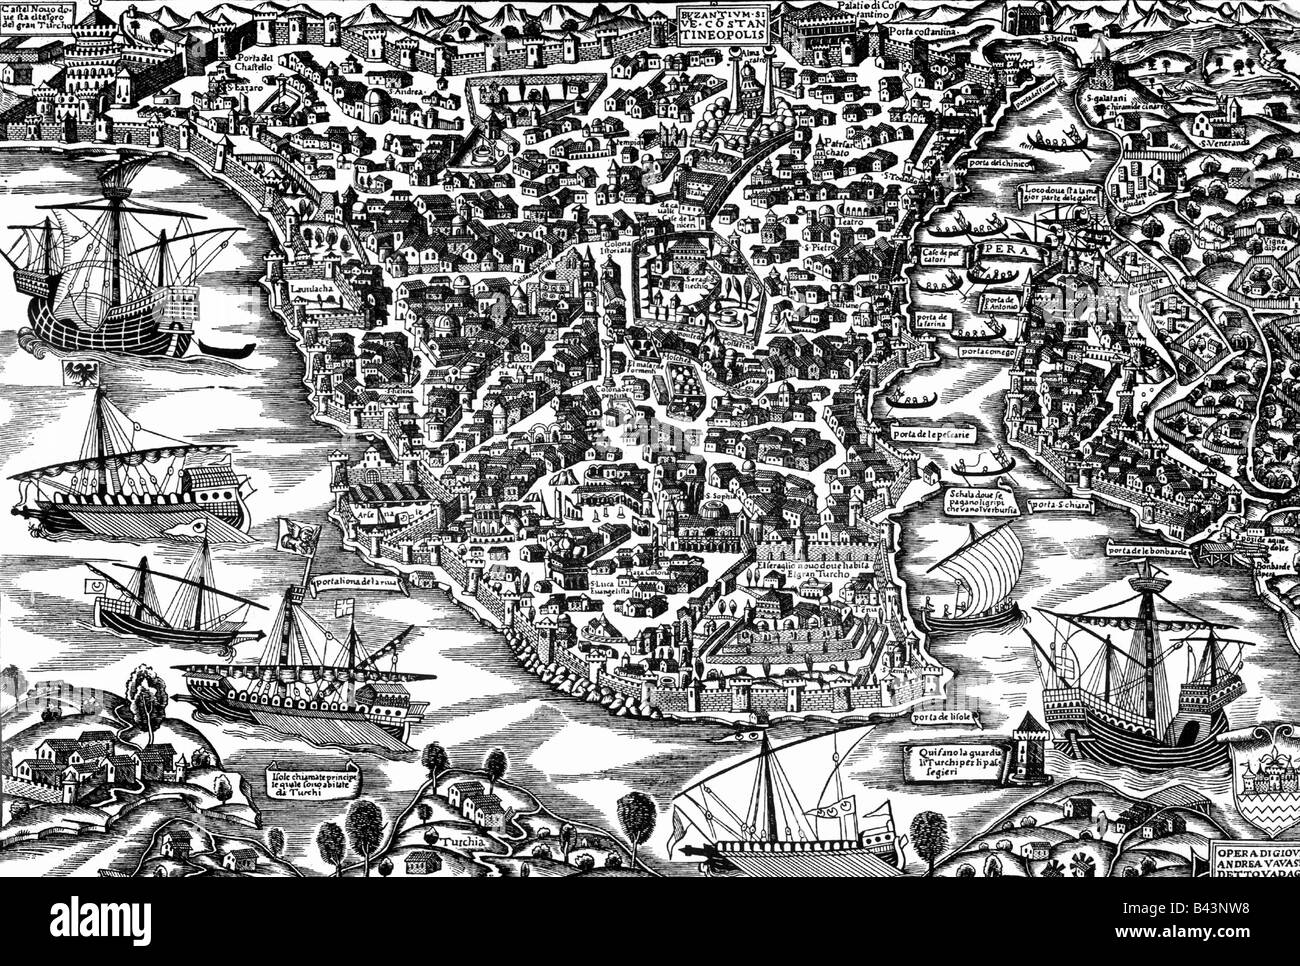 geography / travel, Turkey, Istanbul, (Constantinople), city views / cityscapes, woodcut, 1520, Stock Photo